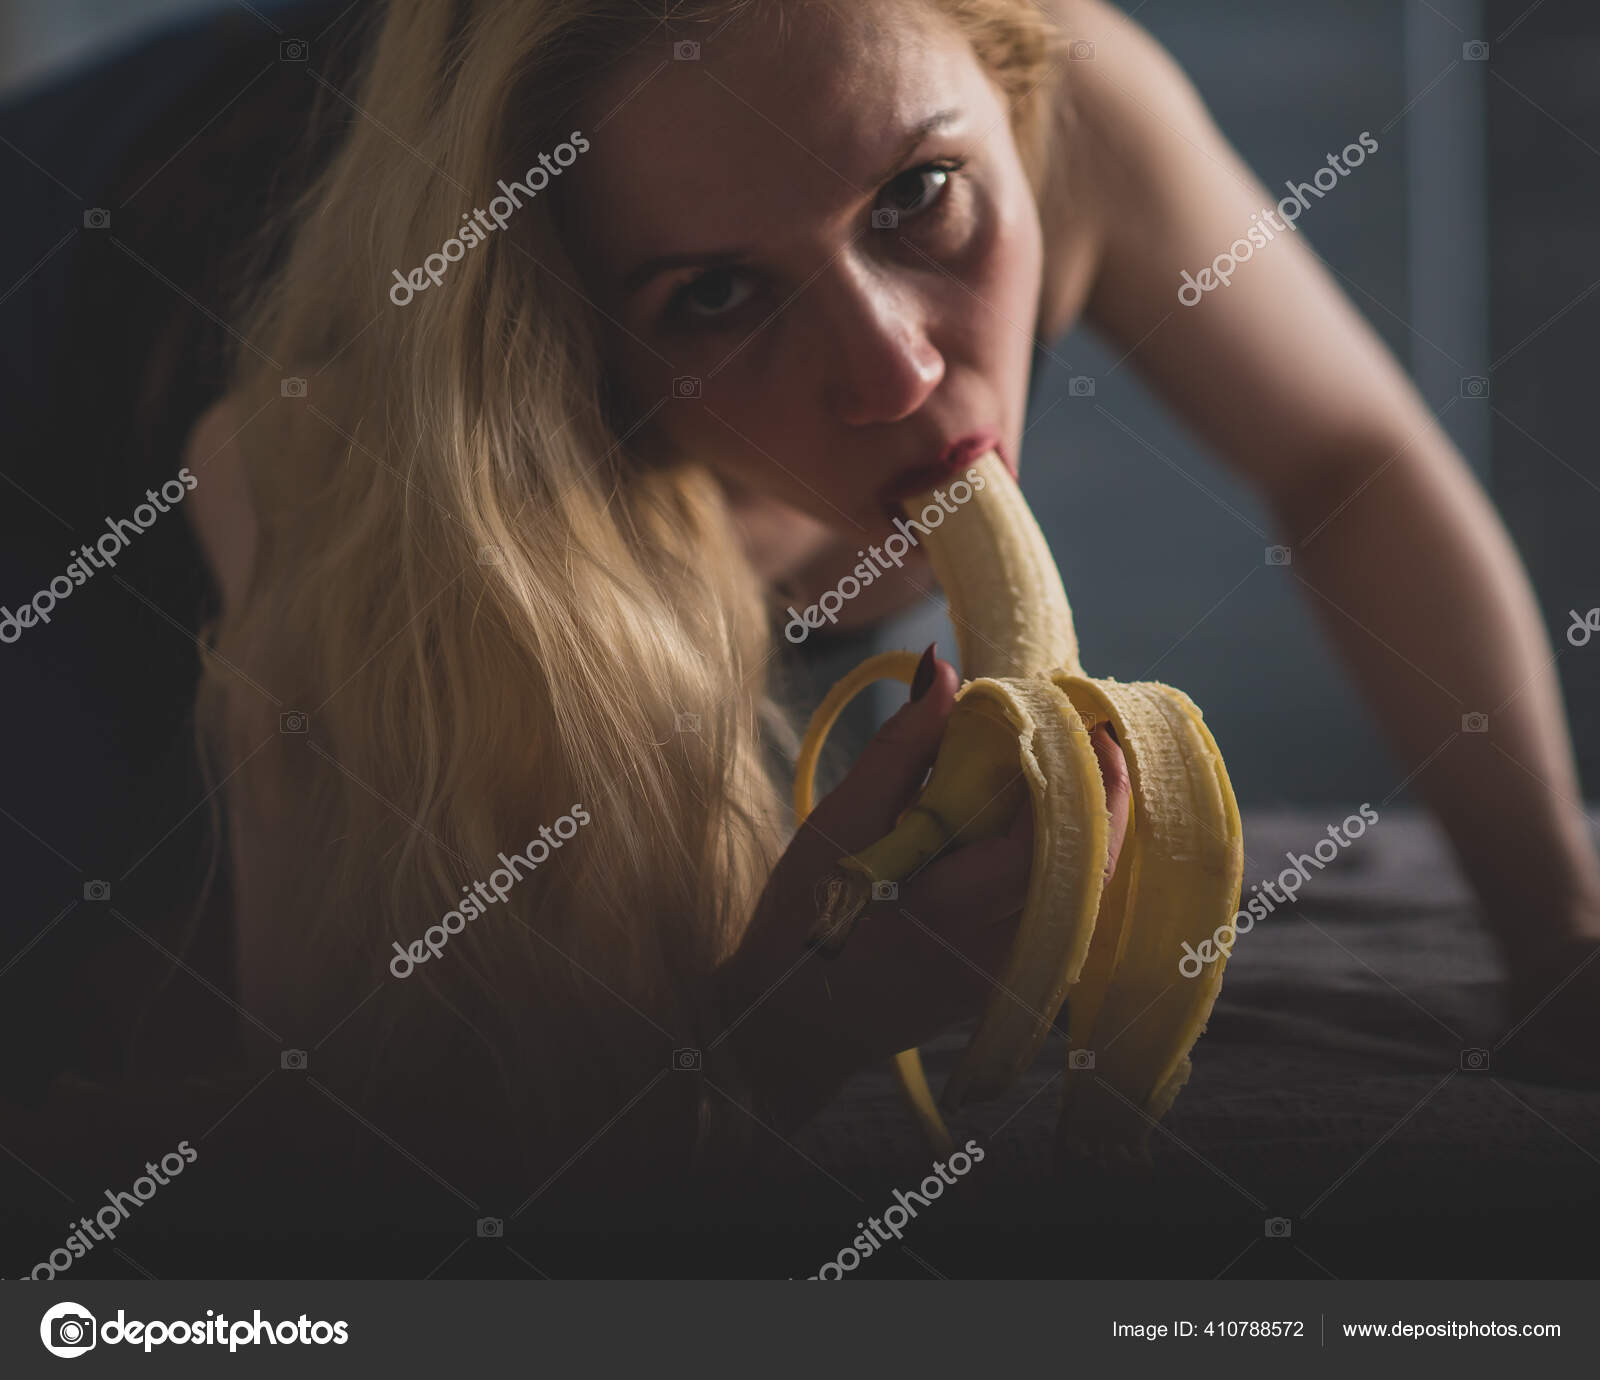 The blonde imitates oral sex and sucks a banana Stock Photo by ©inside-studio 410788572